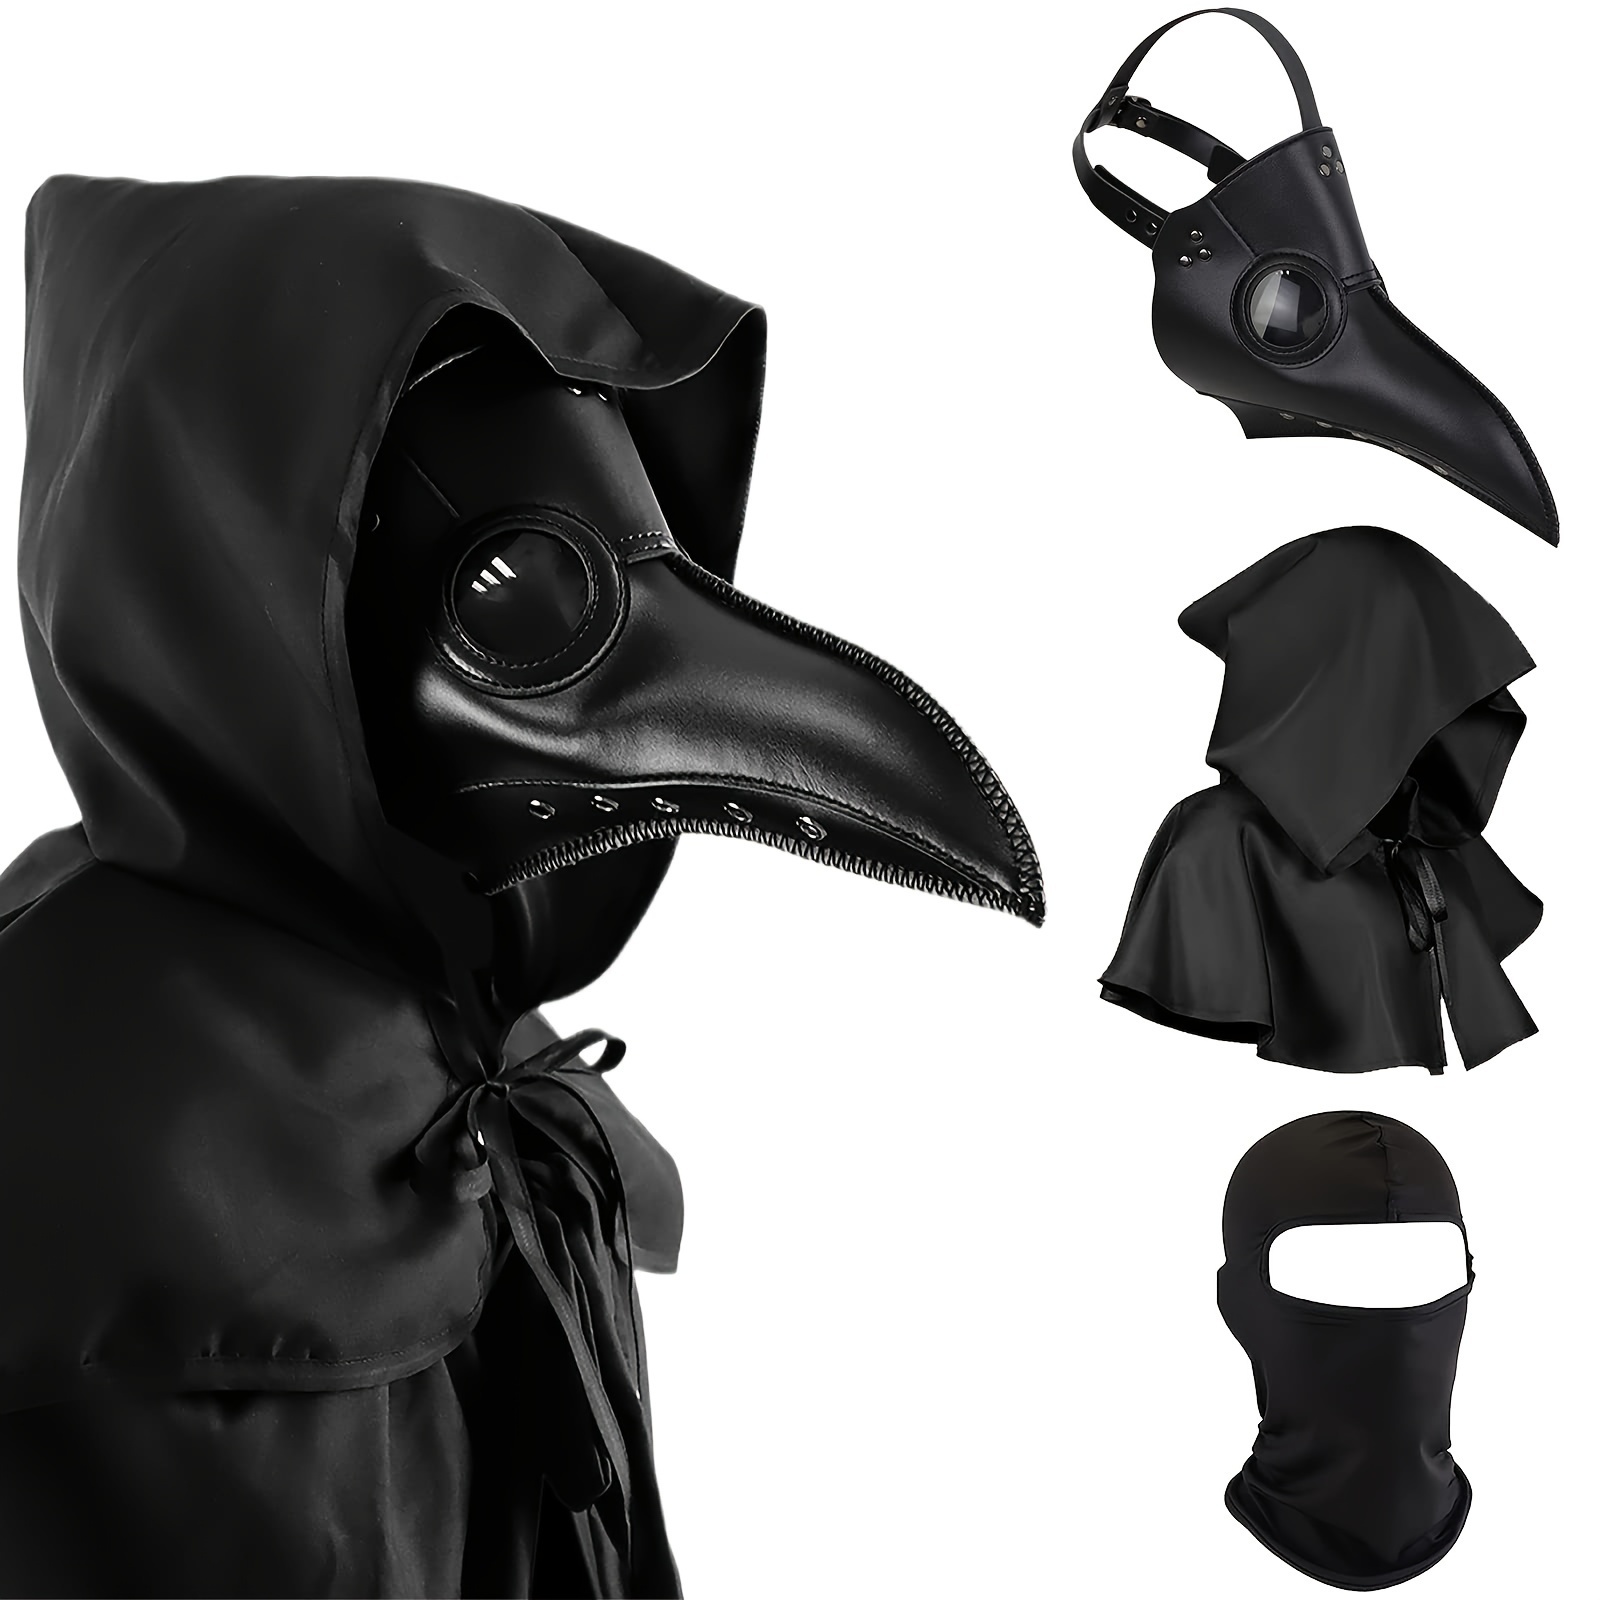 

3pcs/set Halloween Plague Doctor Mask Plague Doctor Costume Steampunk Horror Scary Halloween Costumes For Adults